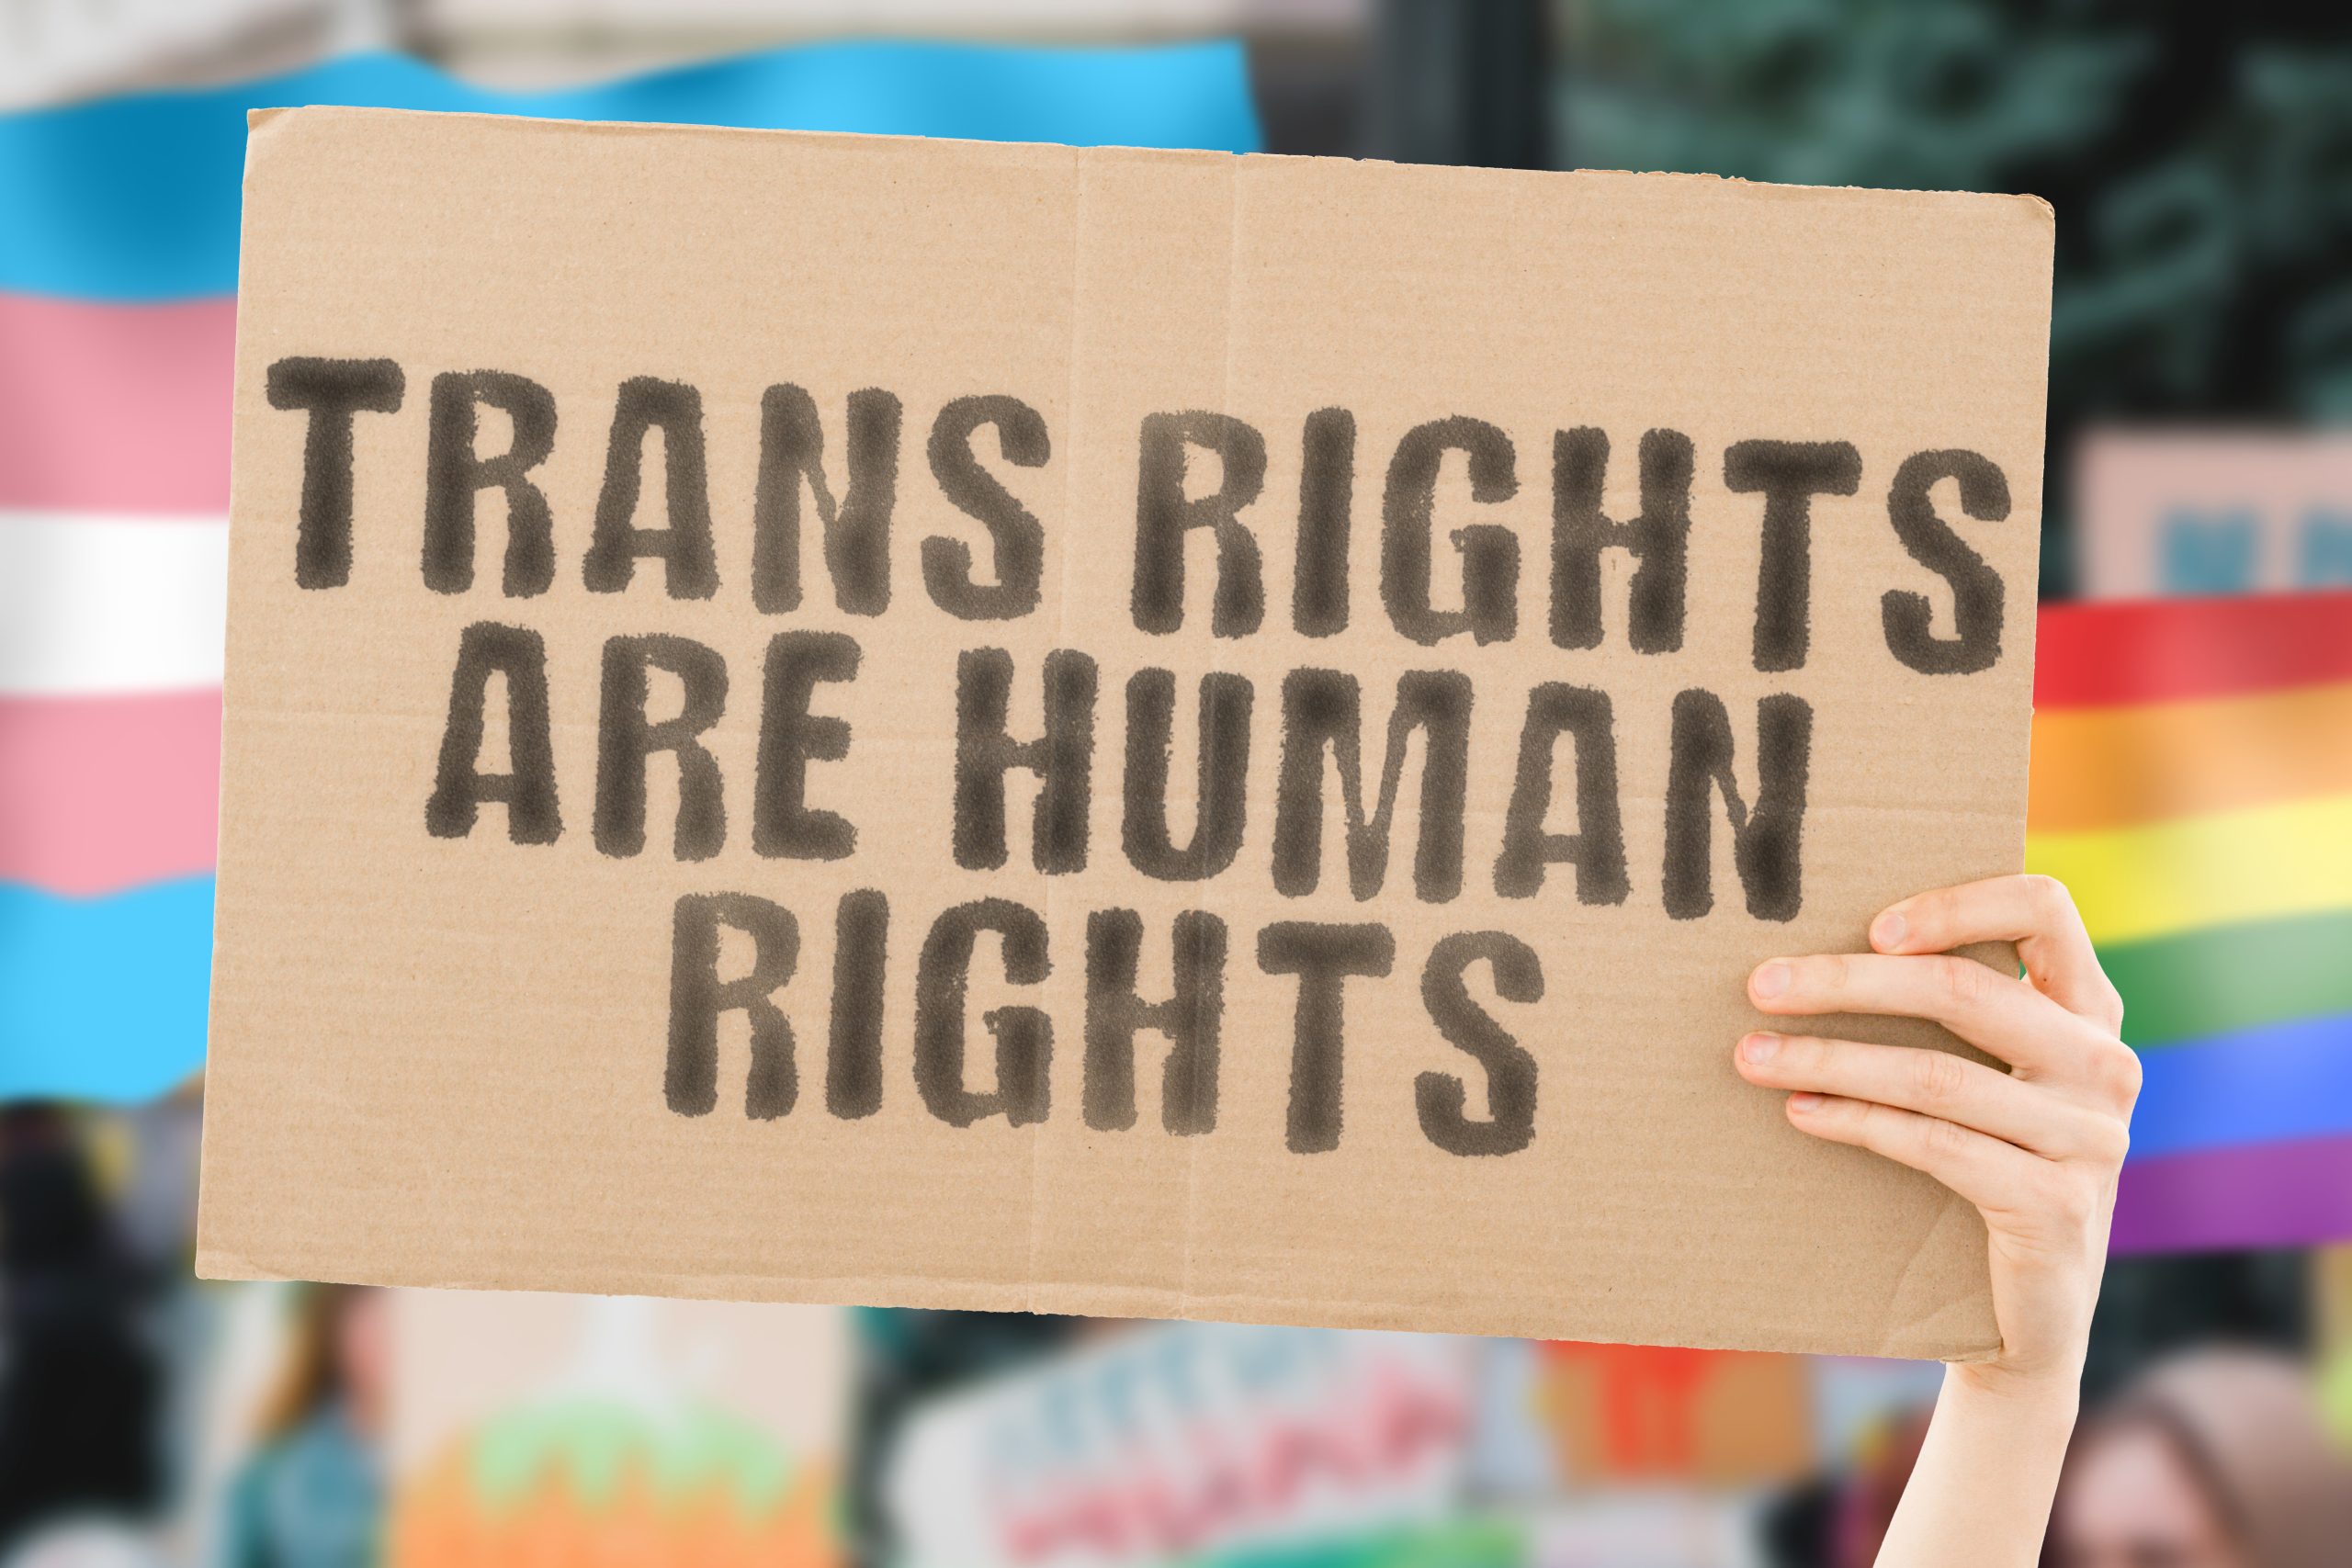 Trans rights are human rights 